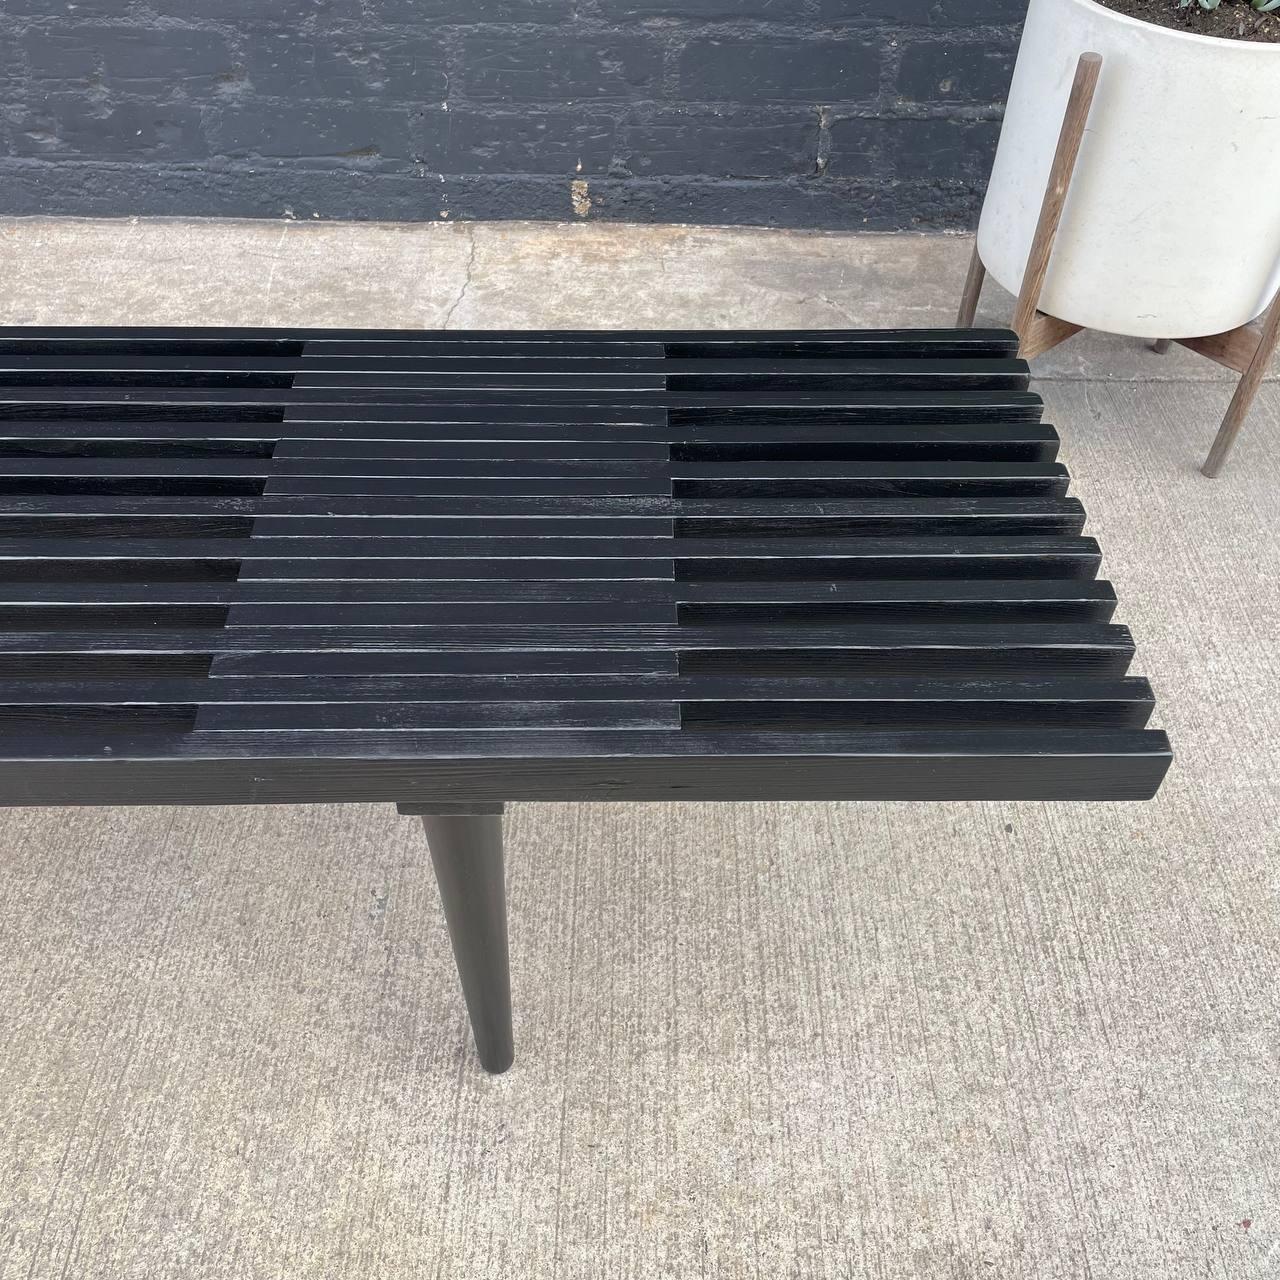 Newly Refinished - Mid-Century Modern Black Slatted Bench or Coffee Table 1